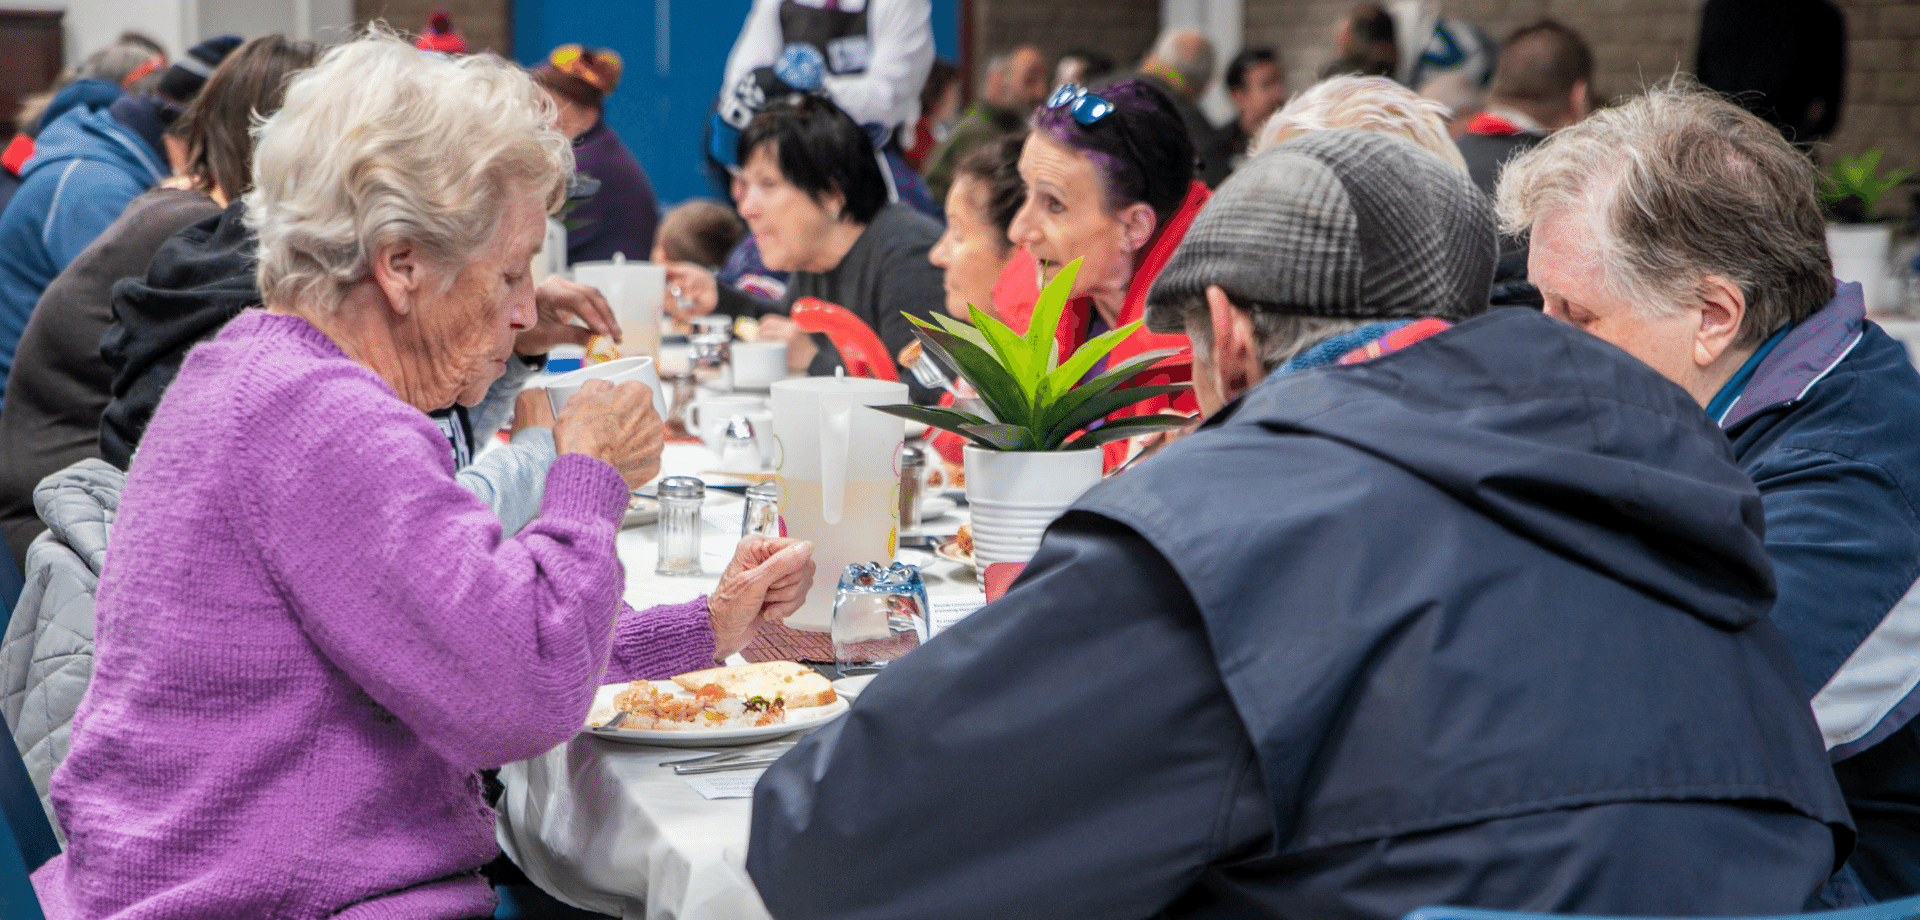 A warm, nutritious meal and friendly smiles for those who are socially isolated.